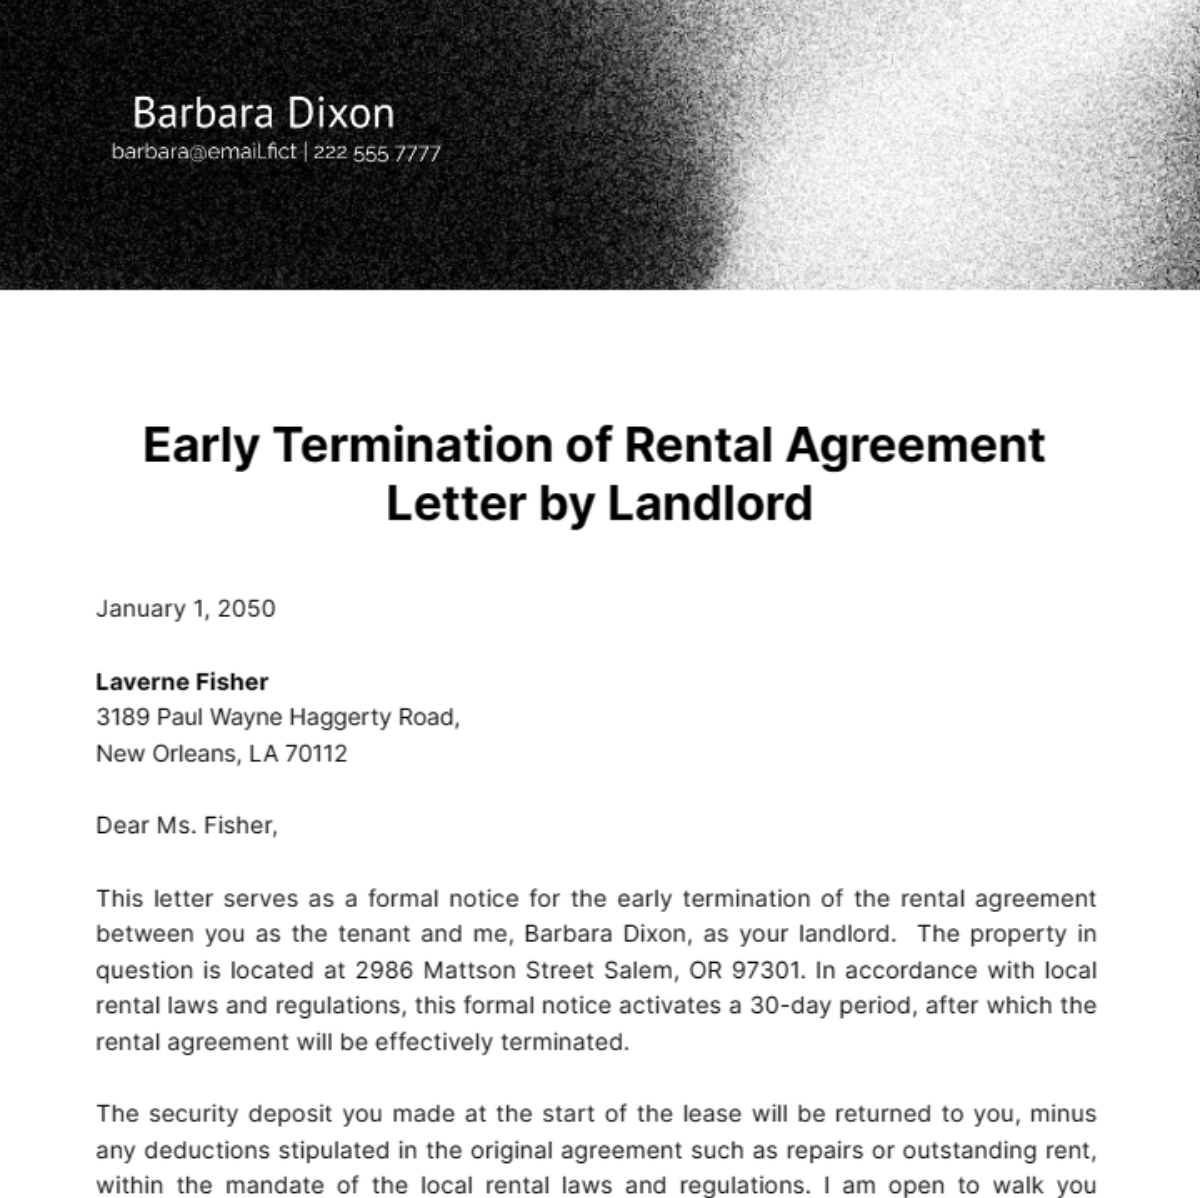 Free Early Termination of Rental Agreement Letter by Landlord Template